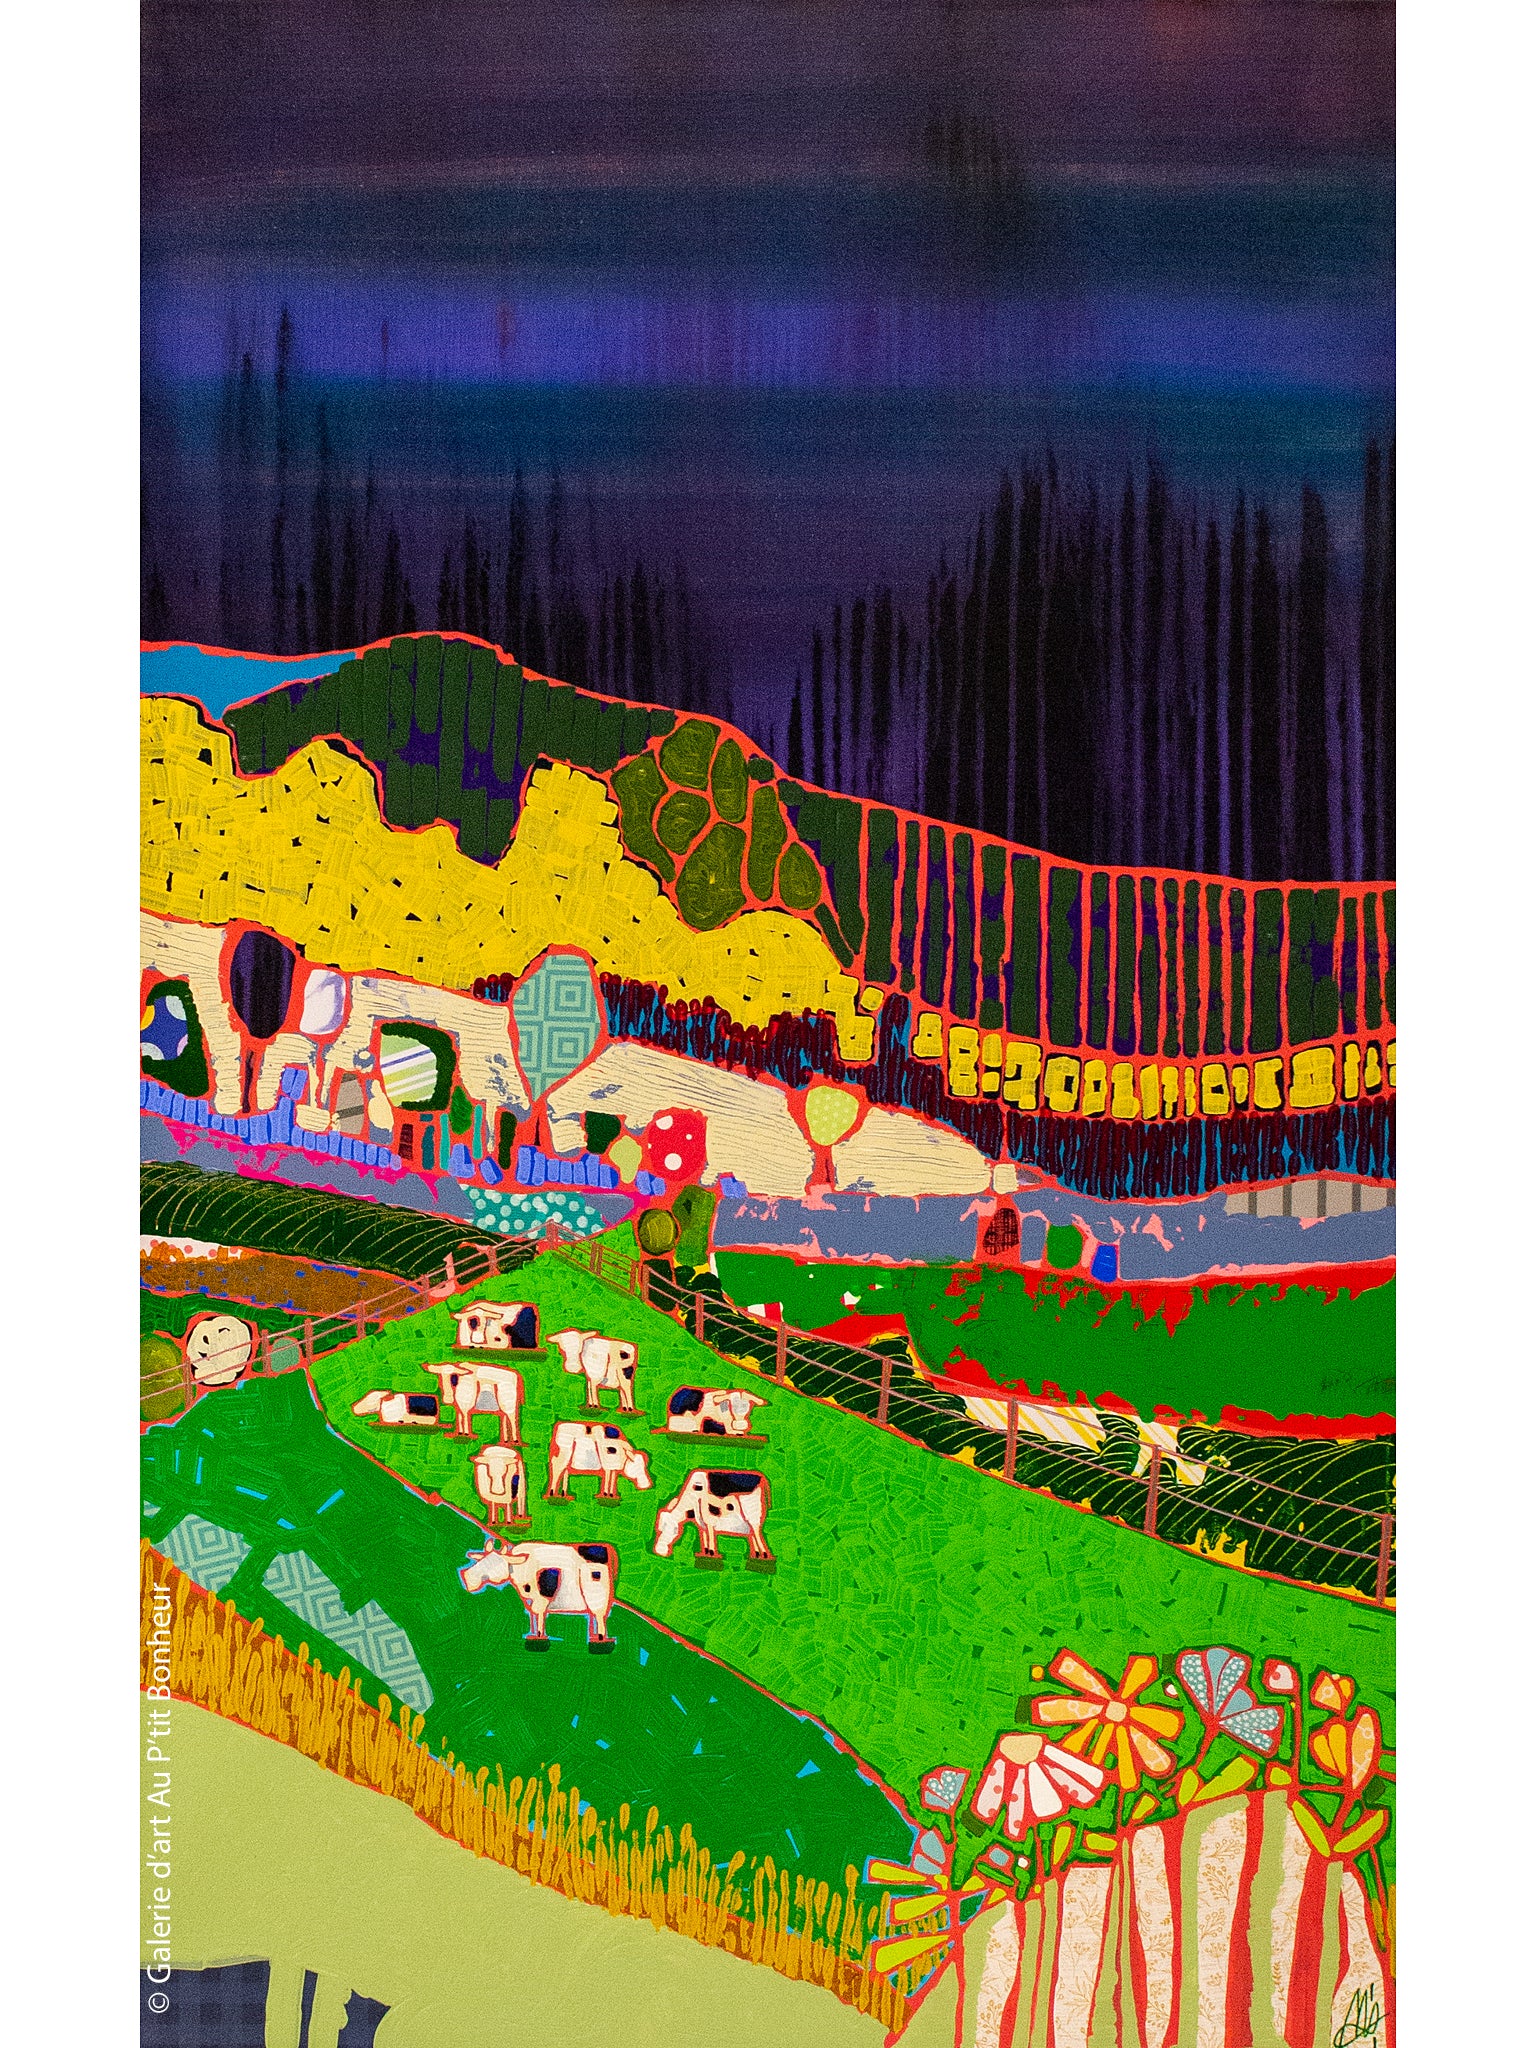 Ann Murphy | Moo’s and Multicolored Fields